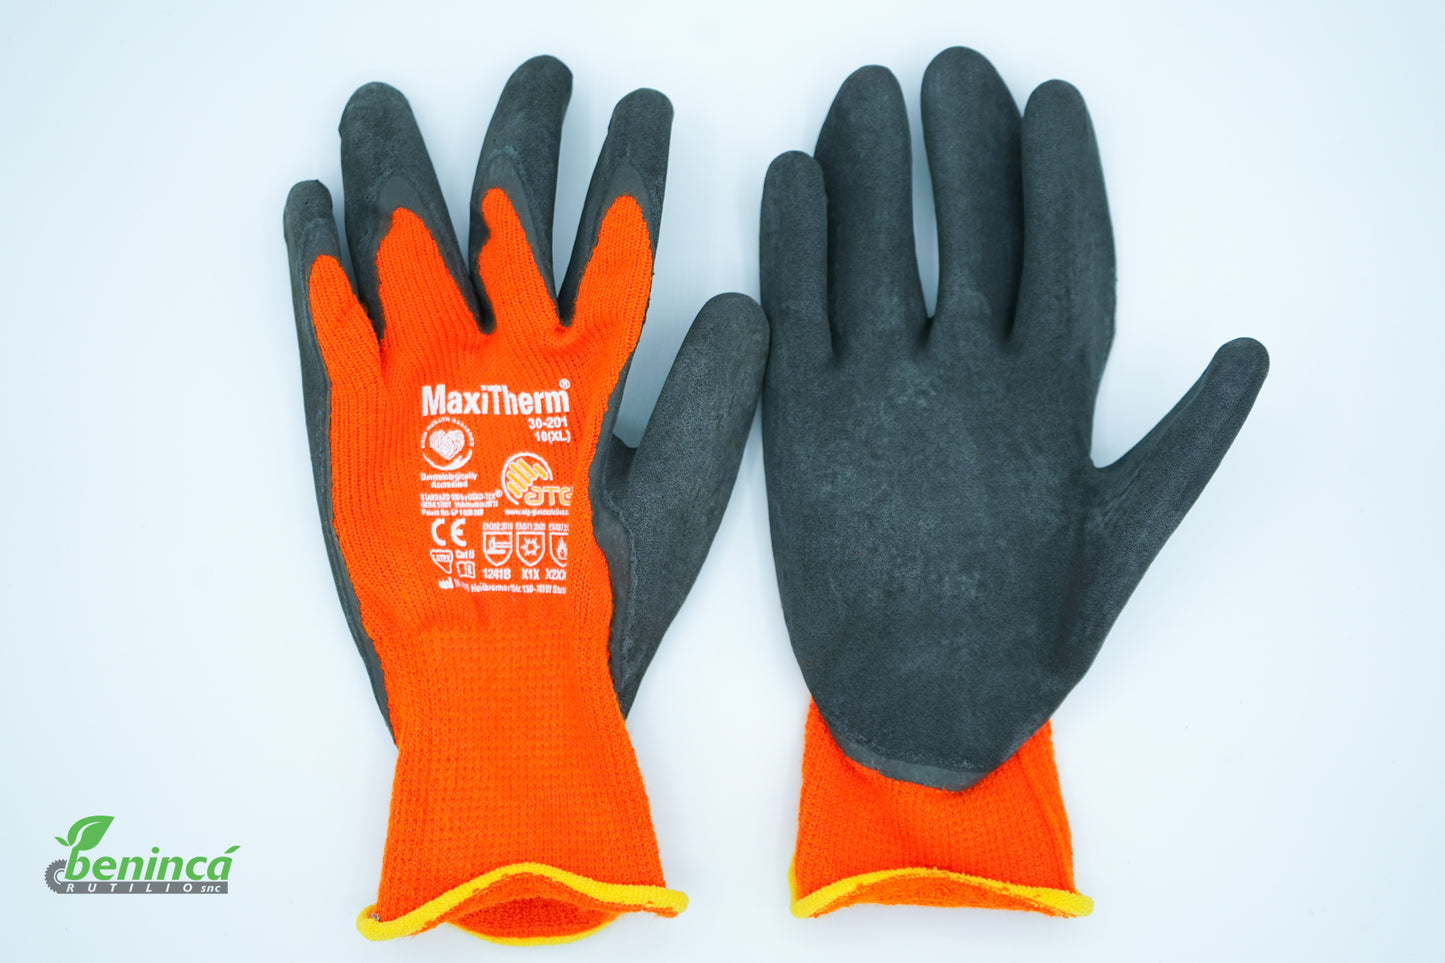 MaxiTherm winter gloves